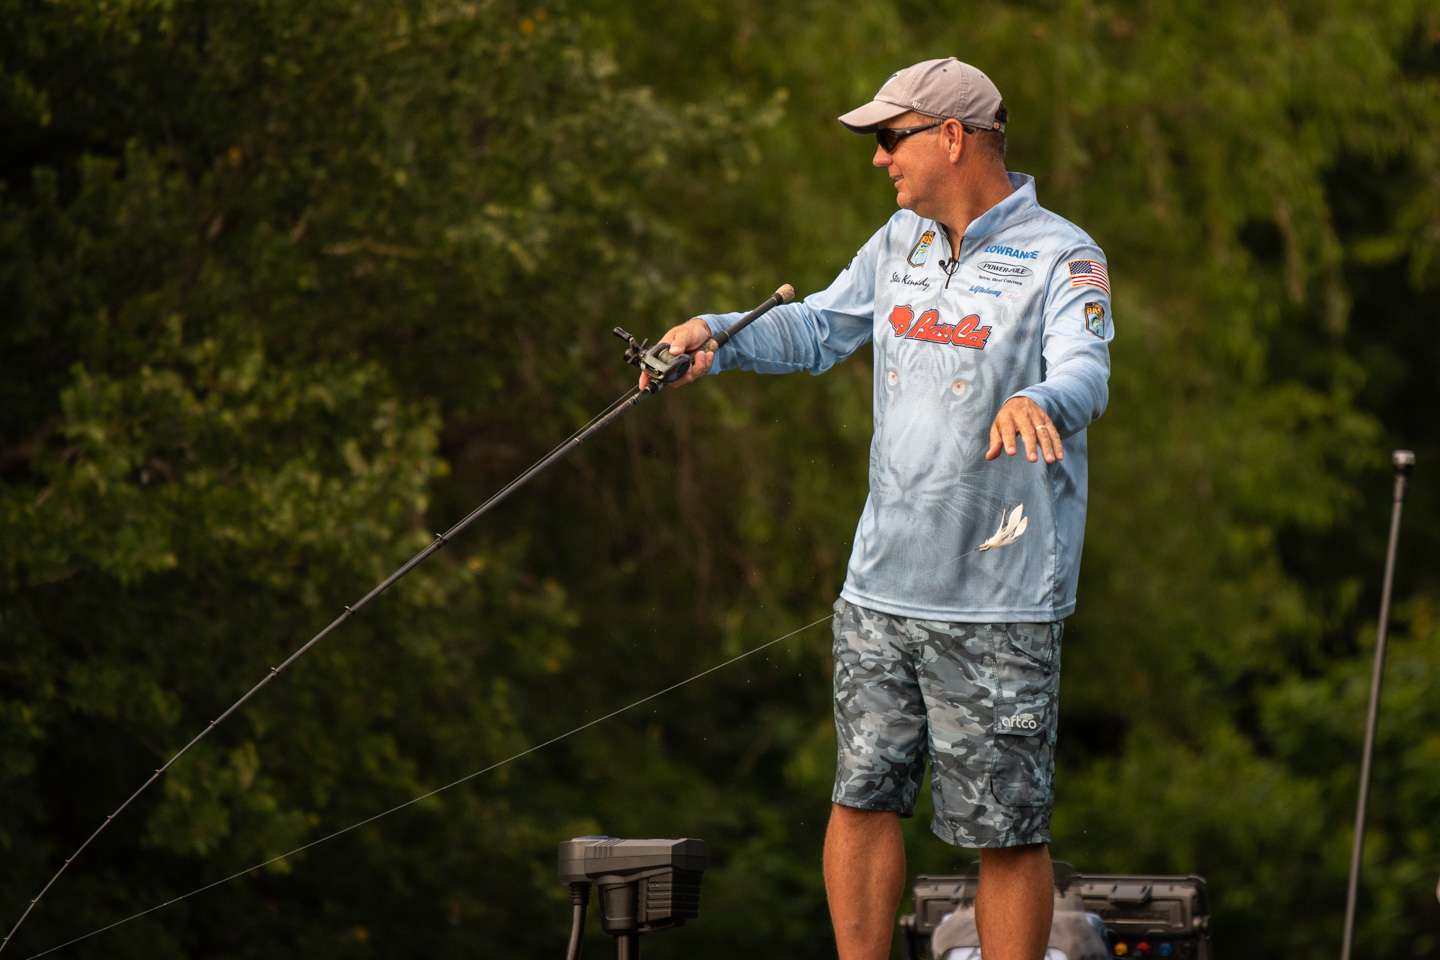 Join Steve Kennedy as he brings 'em in big time on the first day of the 2021 Academy Sports + Outdoors Bassmaster Classic presented by Huk!